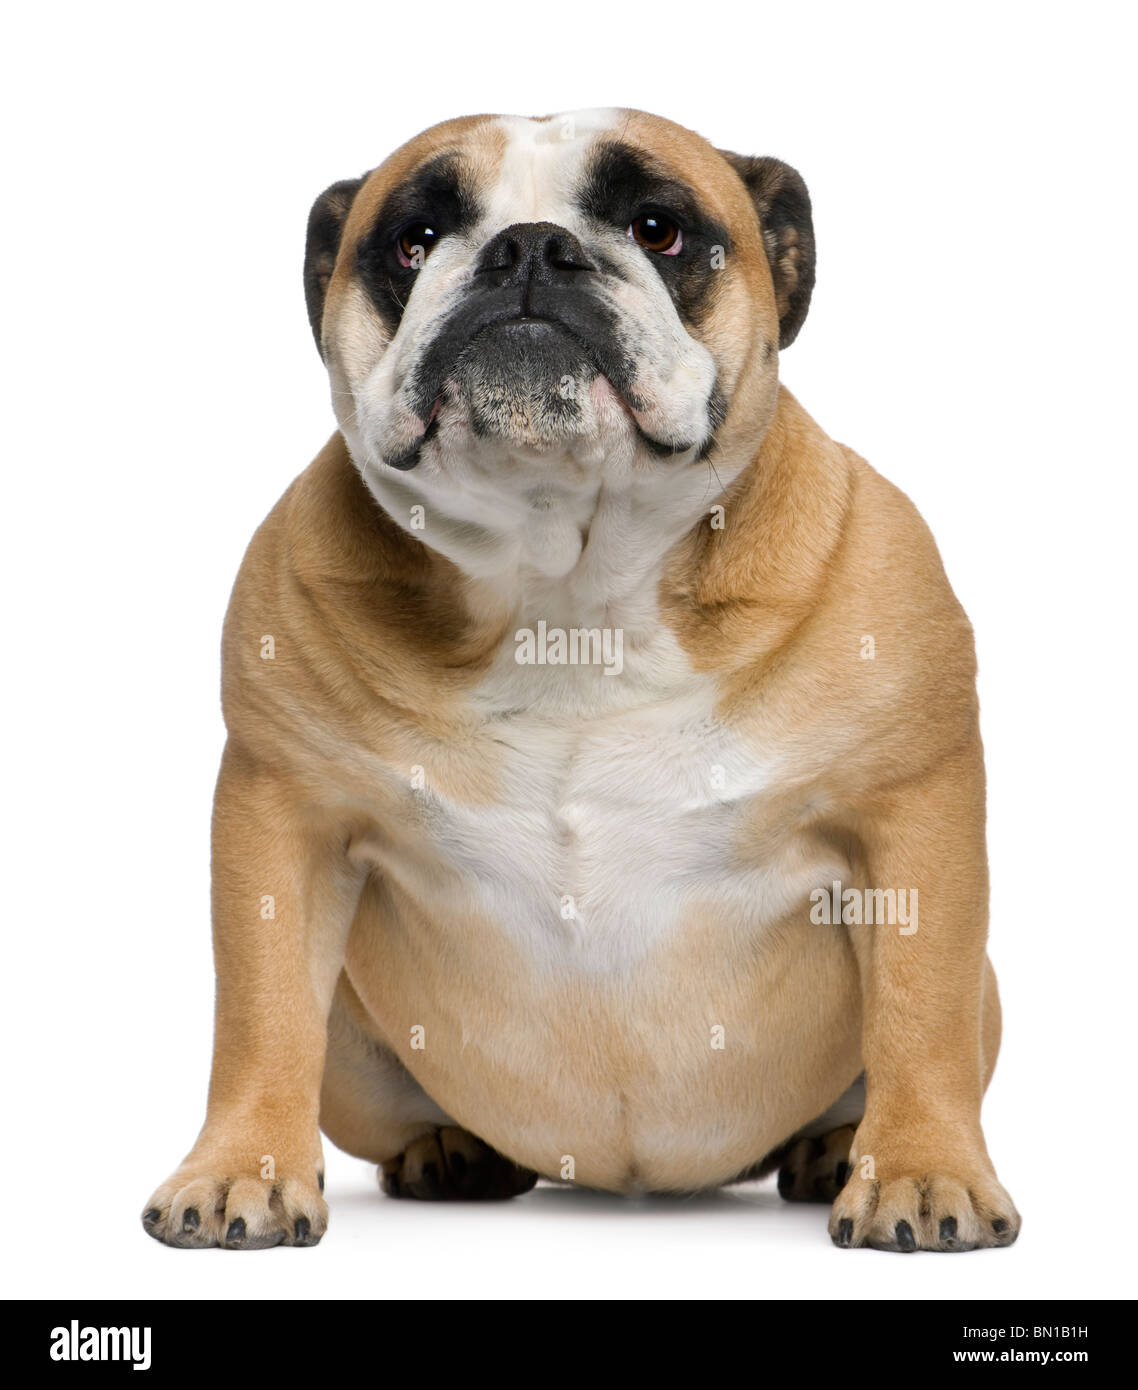 English Bulldog, 3 years old, sitting in front of white background Stock Photo